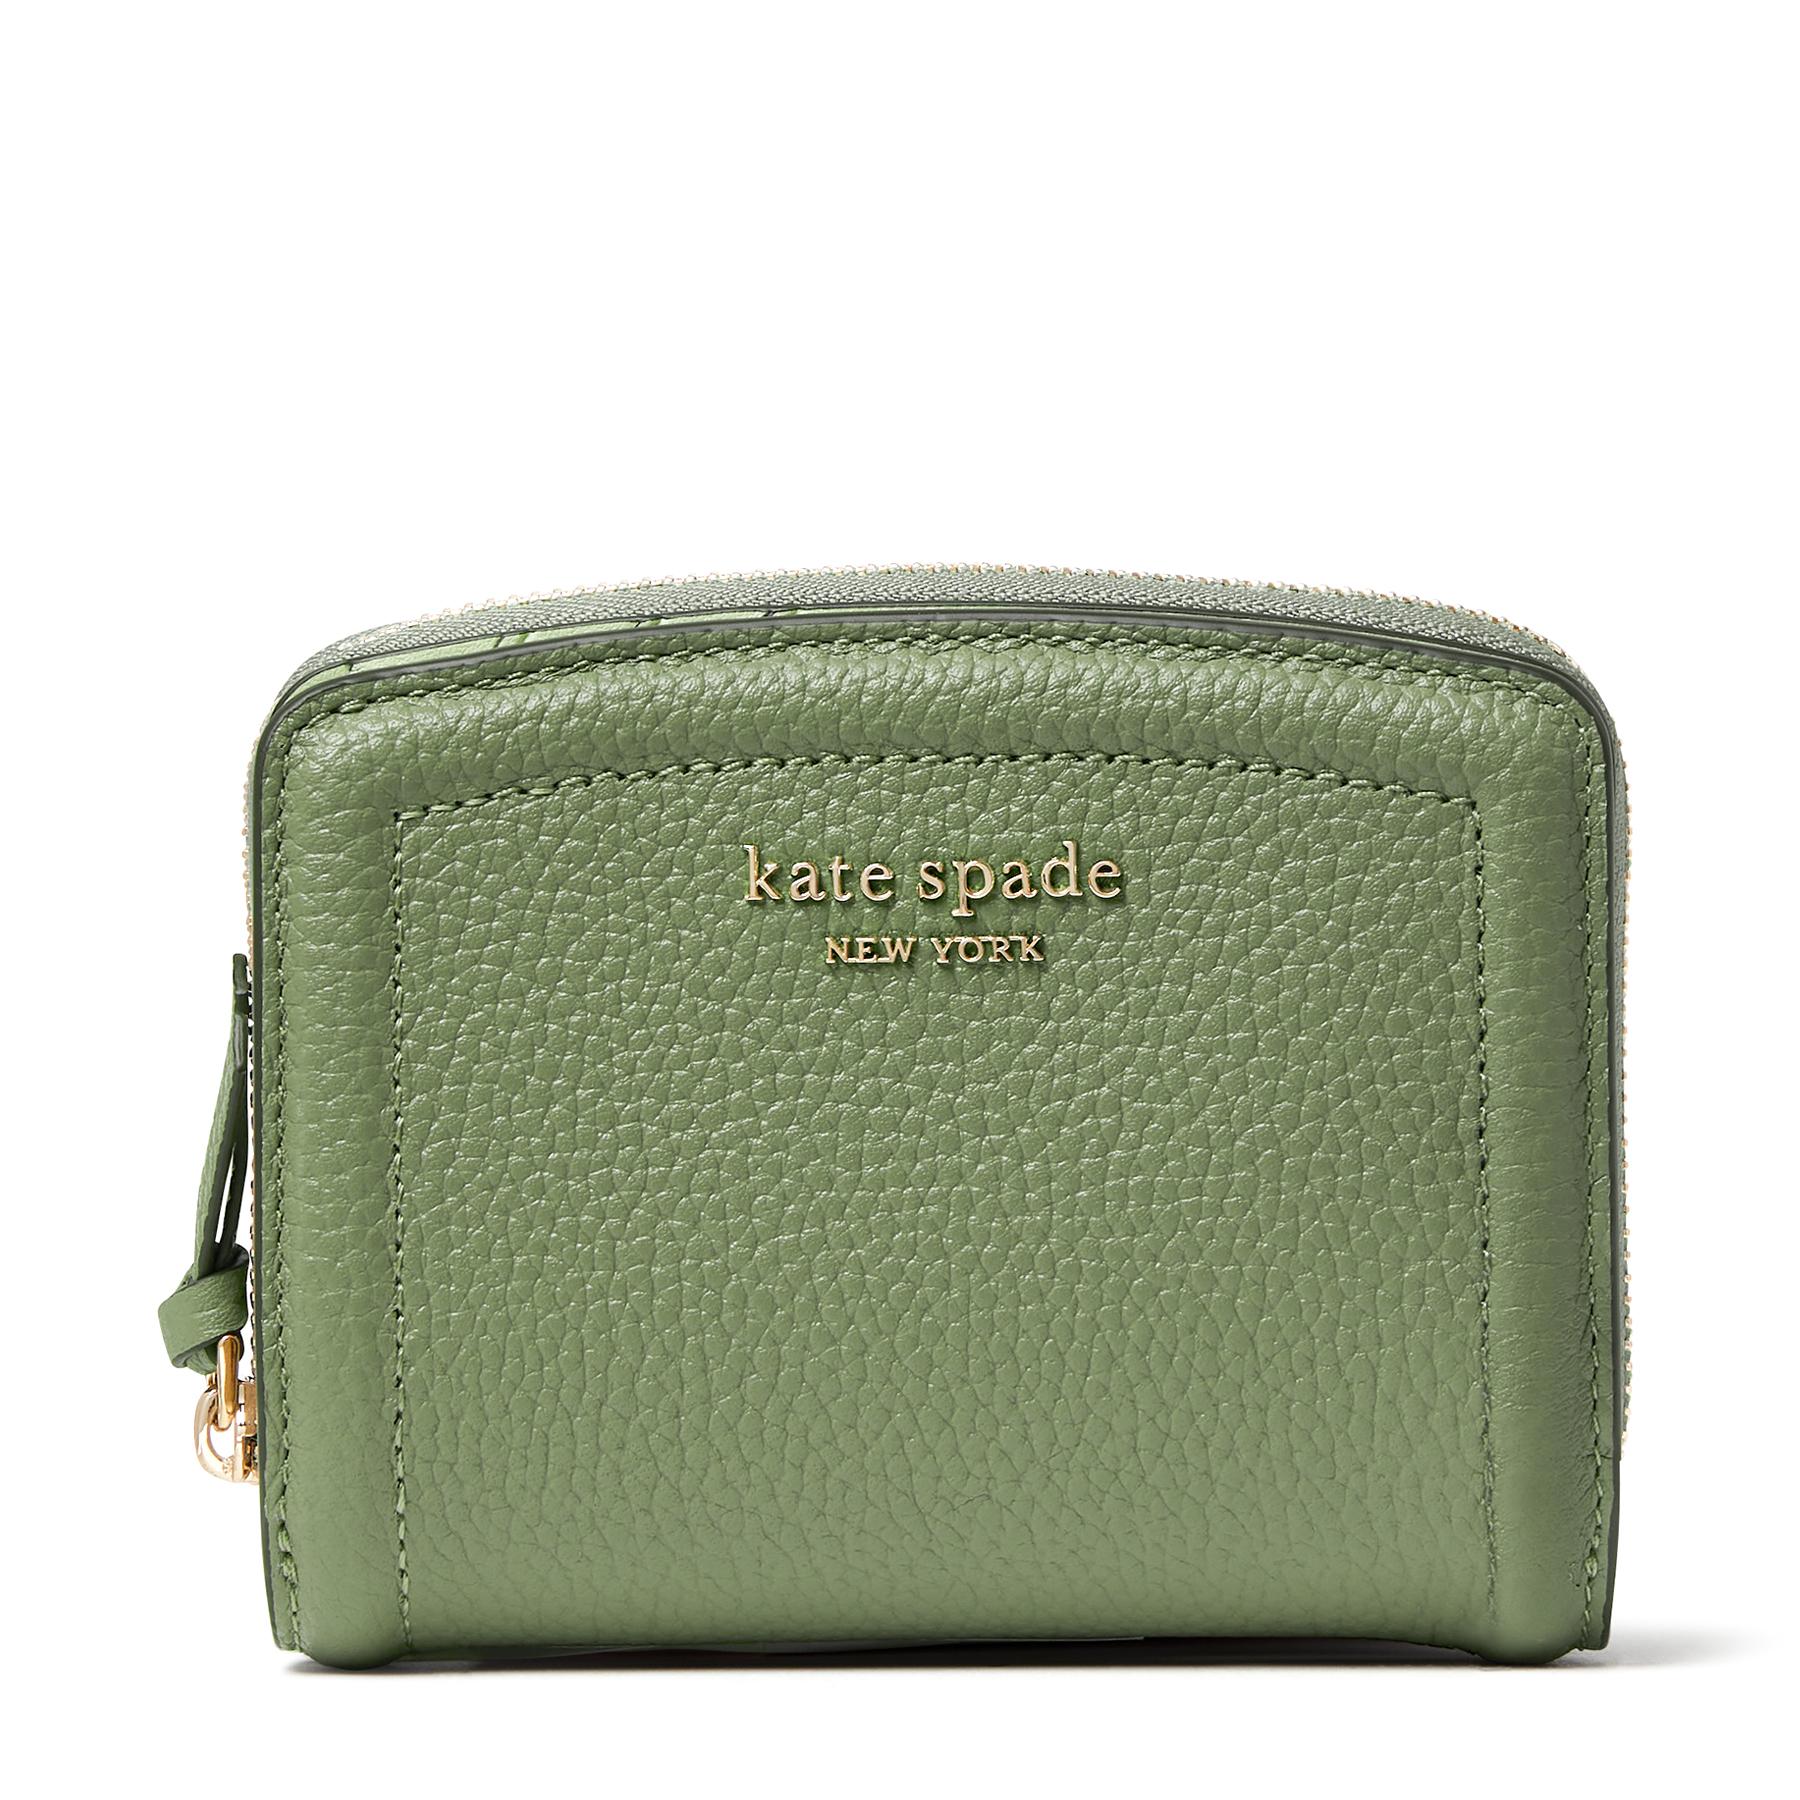 Kate Spade Knott Pebbled Leather Small Compact Wallet in Green | Lyst UK